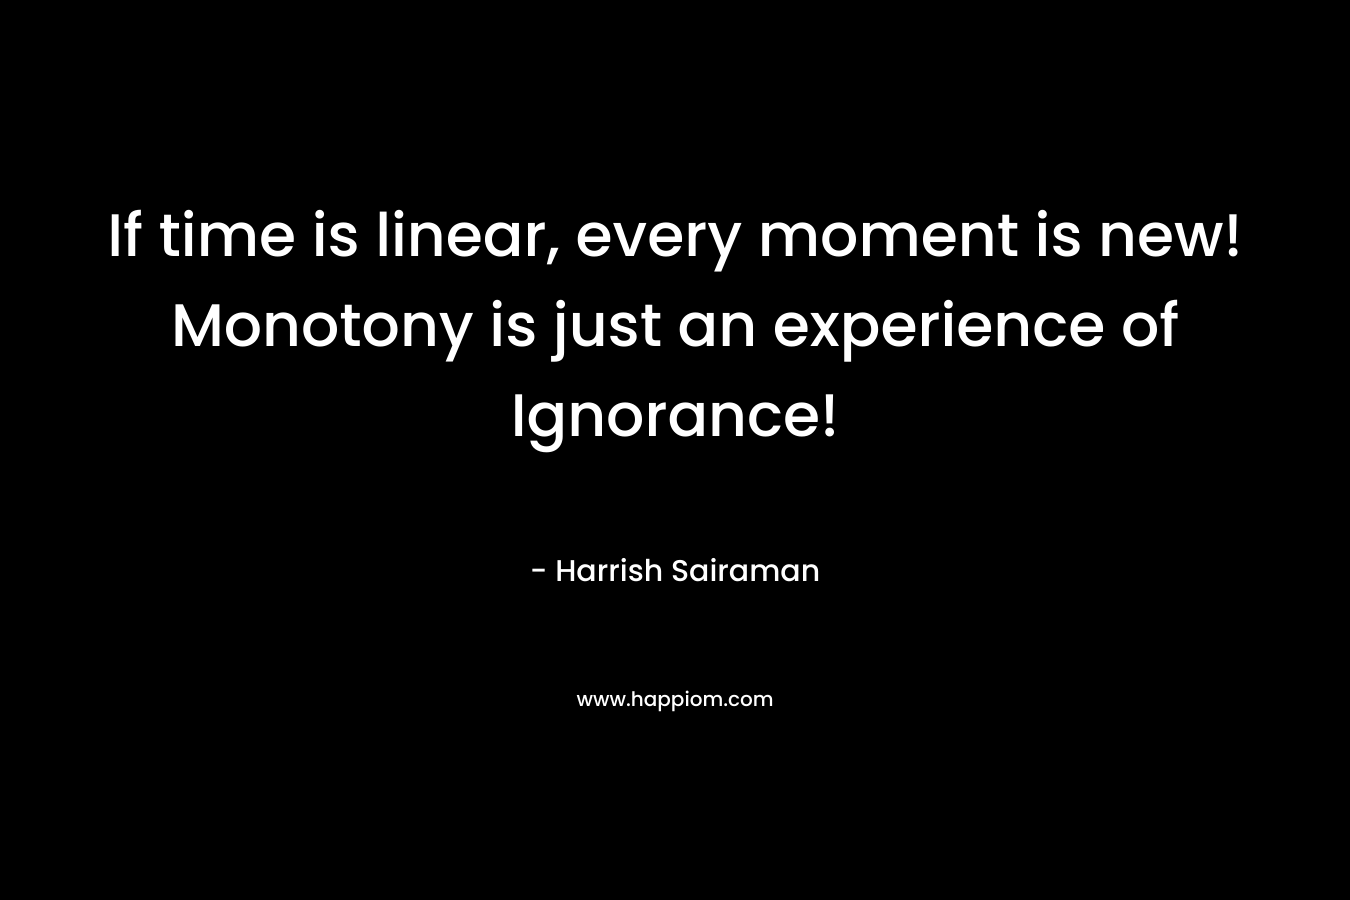 If time is linear, every moment is new! Monotony is just an experience of Ignorance!